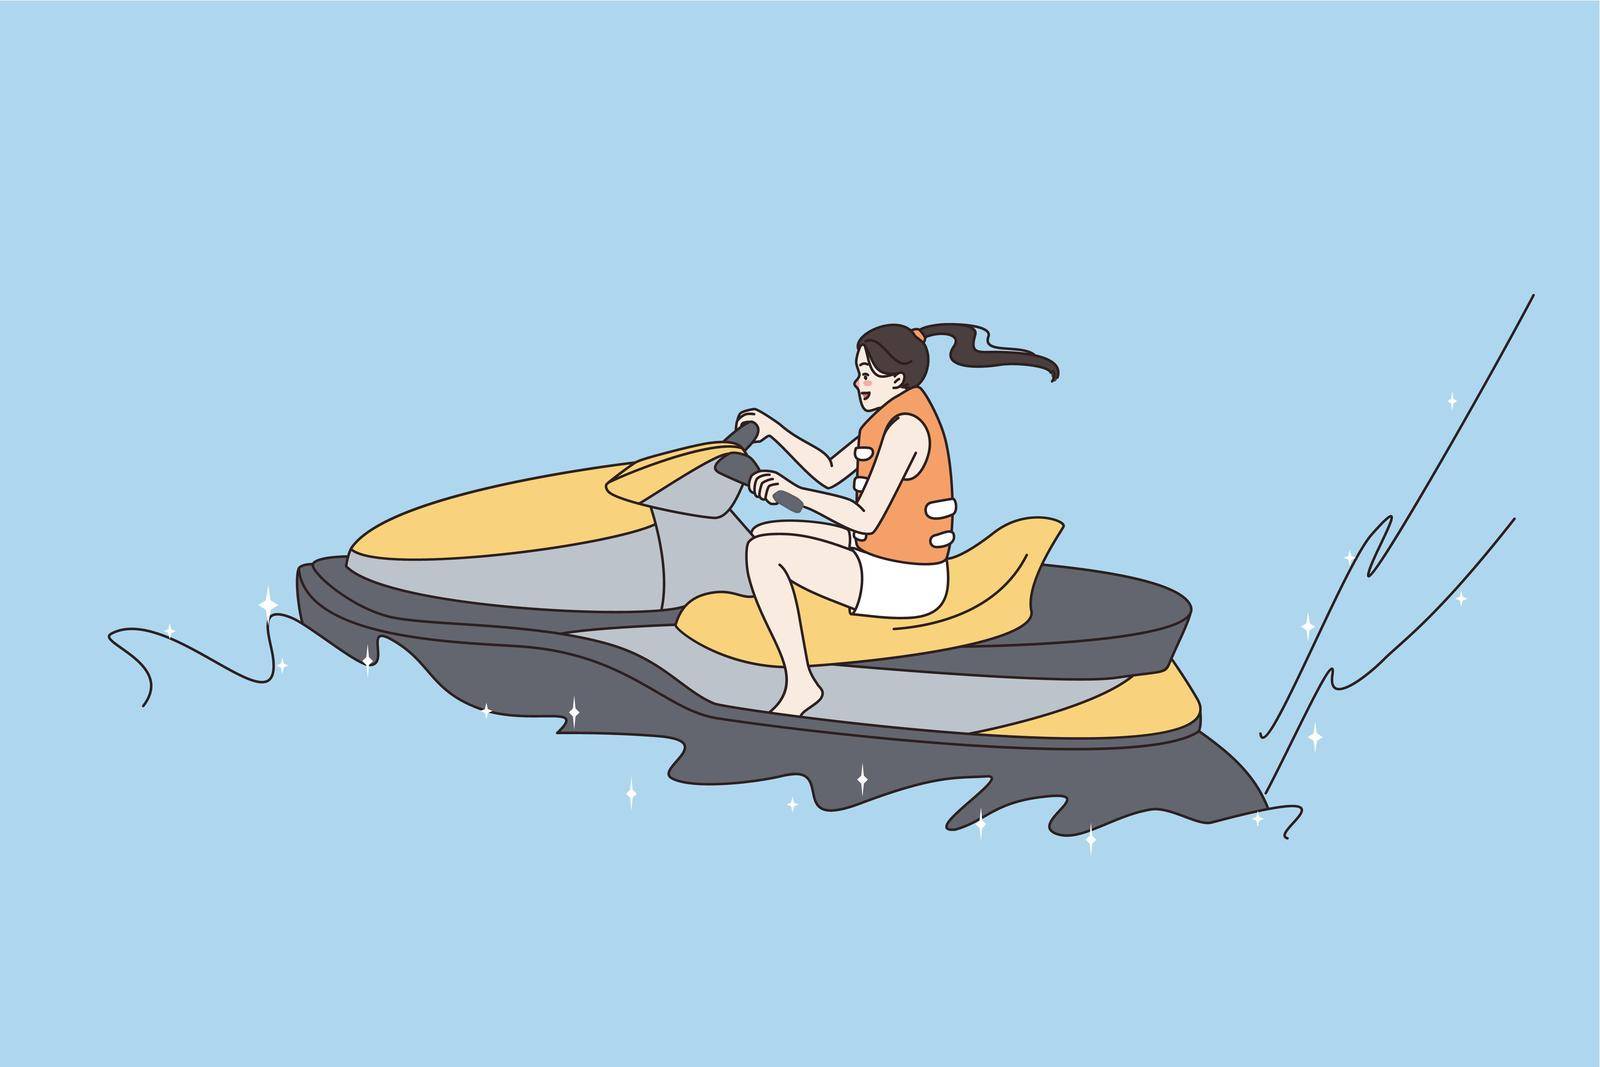 Sport summer leisure activities concept. Young happy cheerful woman sitting and riding jet ski on water during vacations feeling positive vector illustration